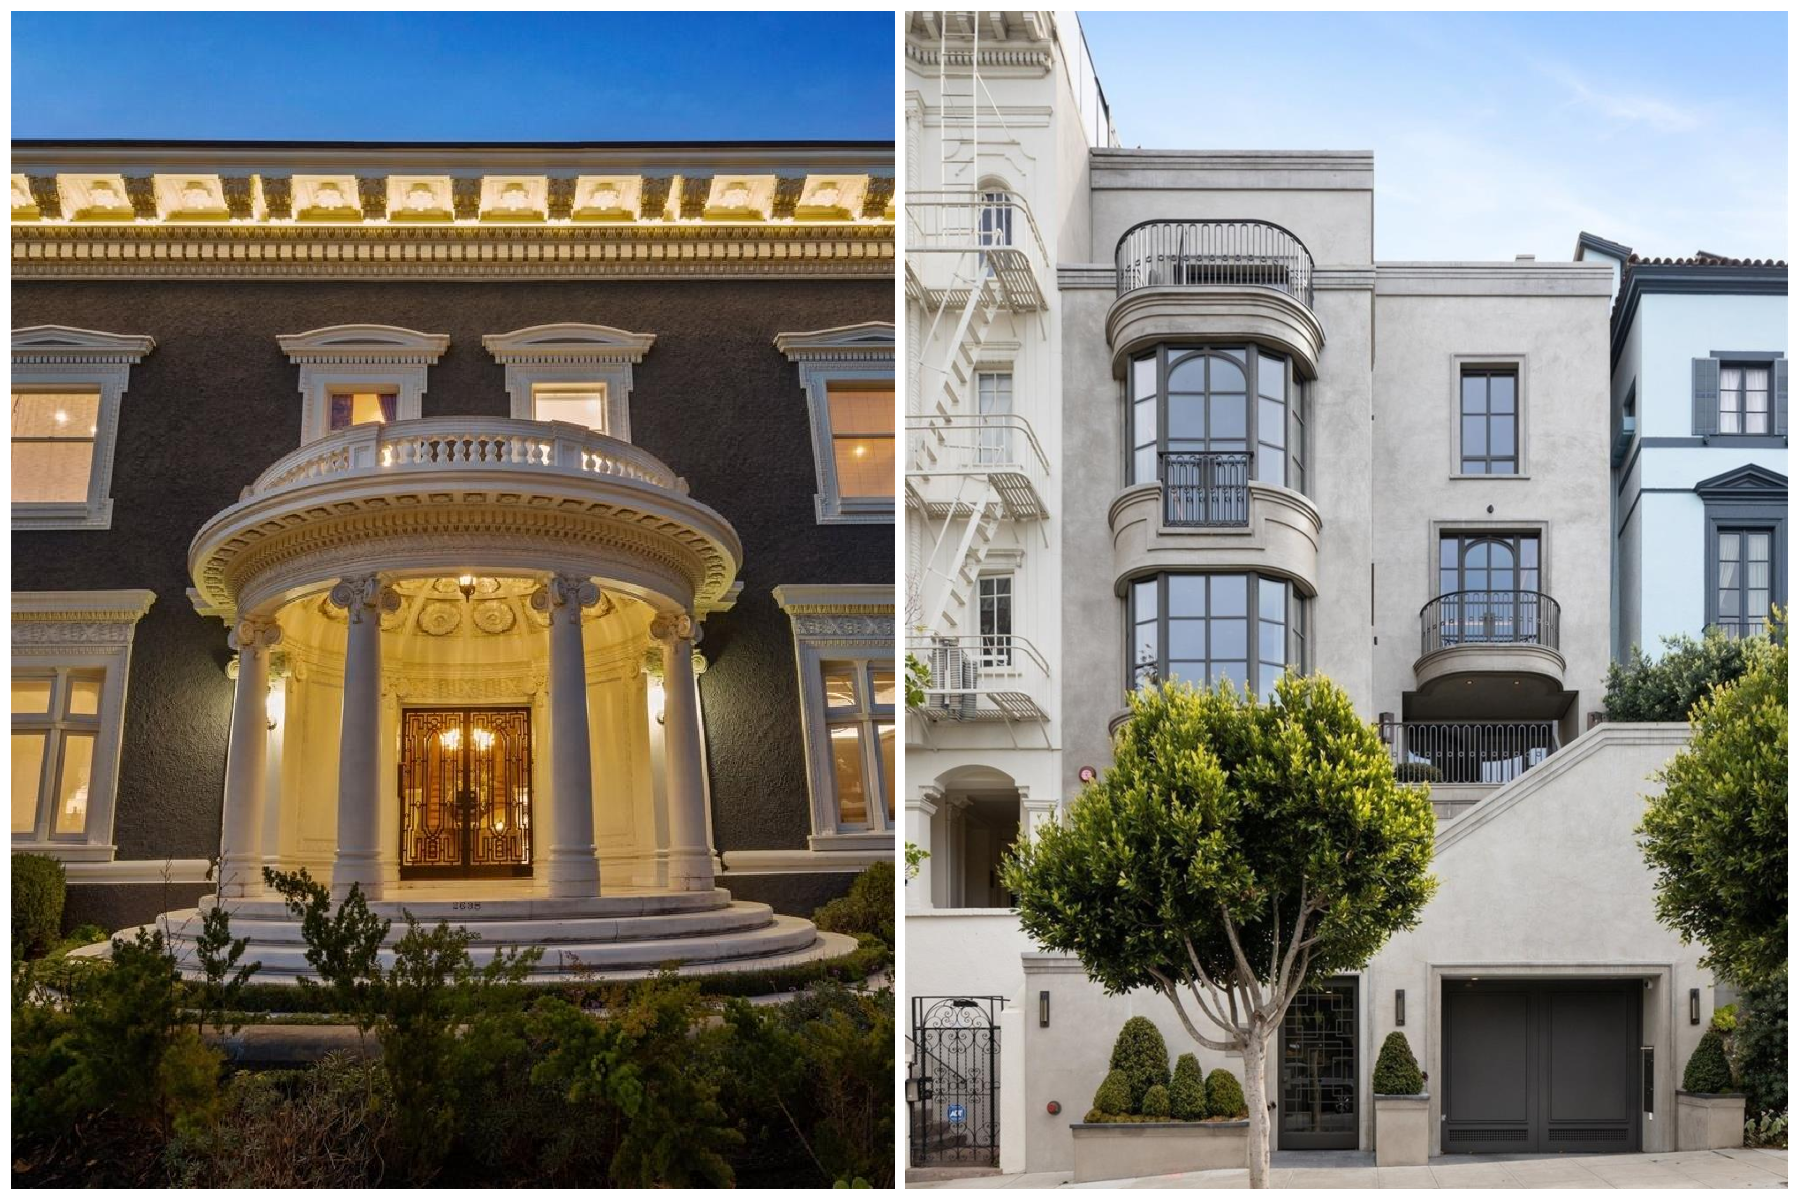 Buying San Francisco: Which $20M Mansion Would You Put Under the Tree?